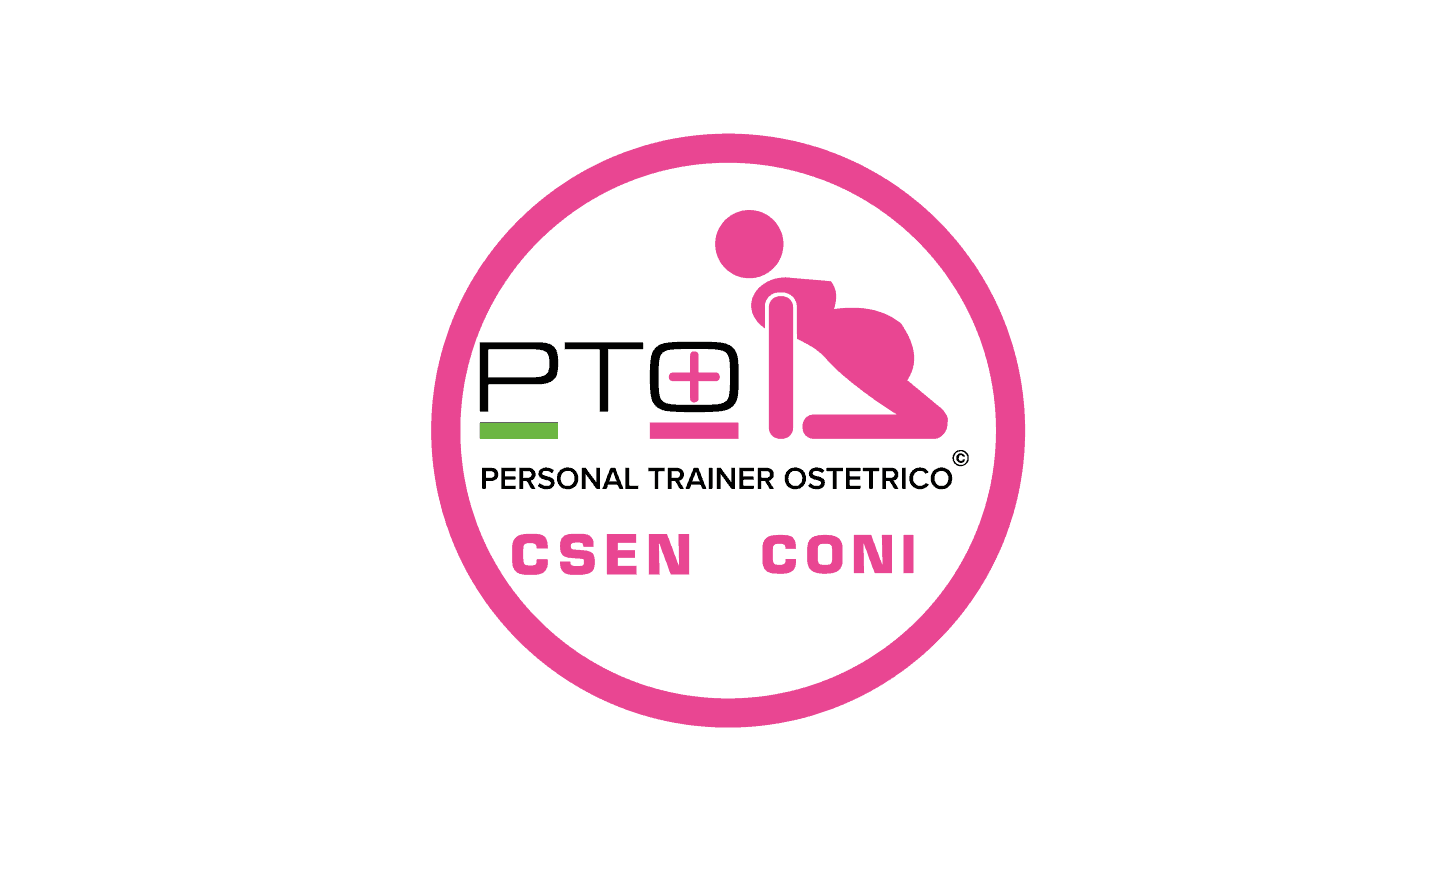 PERSONAL TRAINER OSTETRICO ®